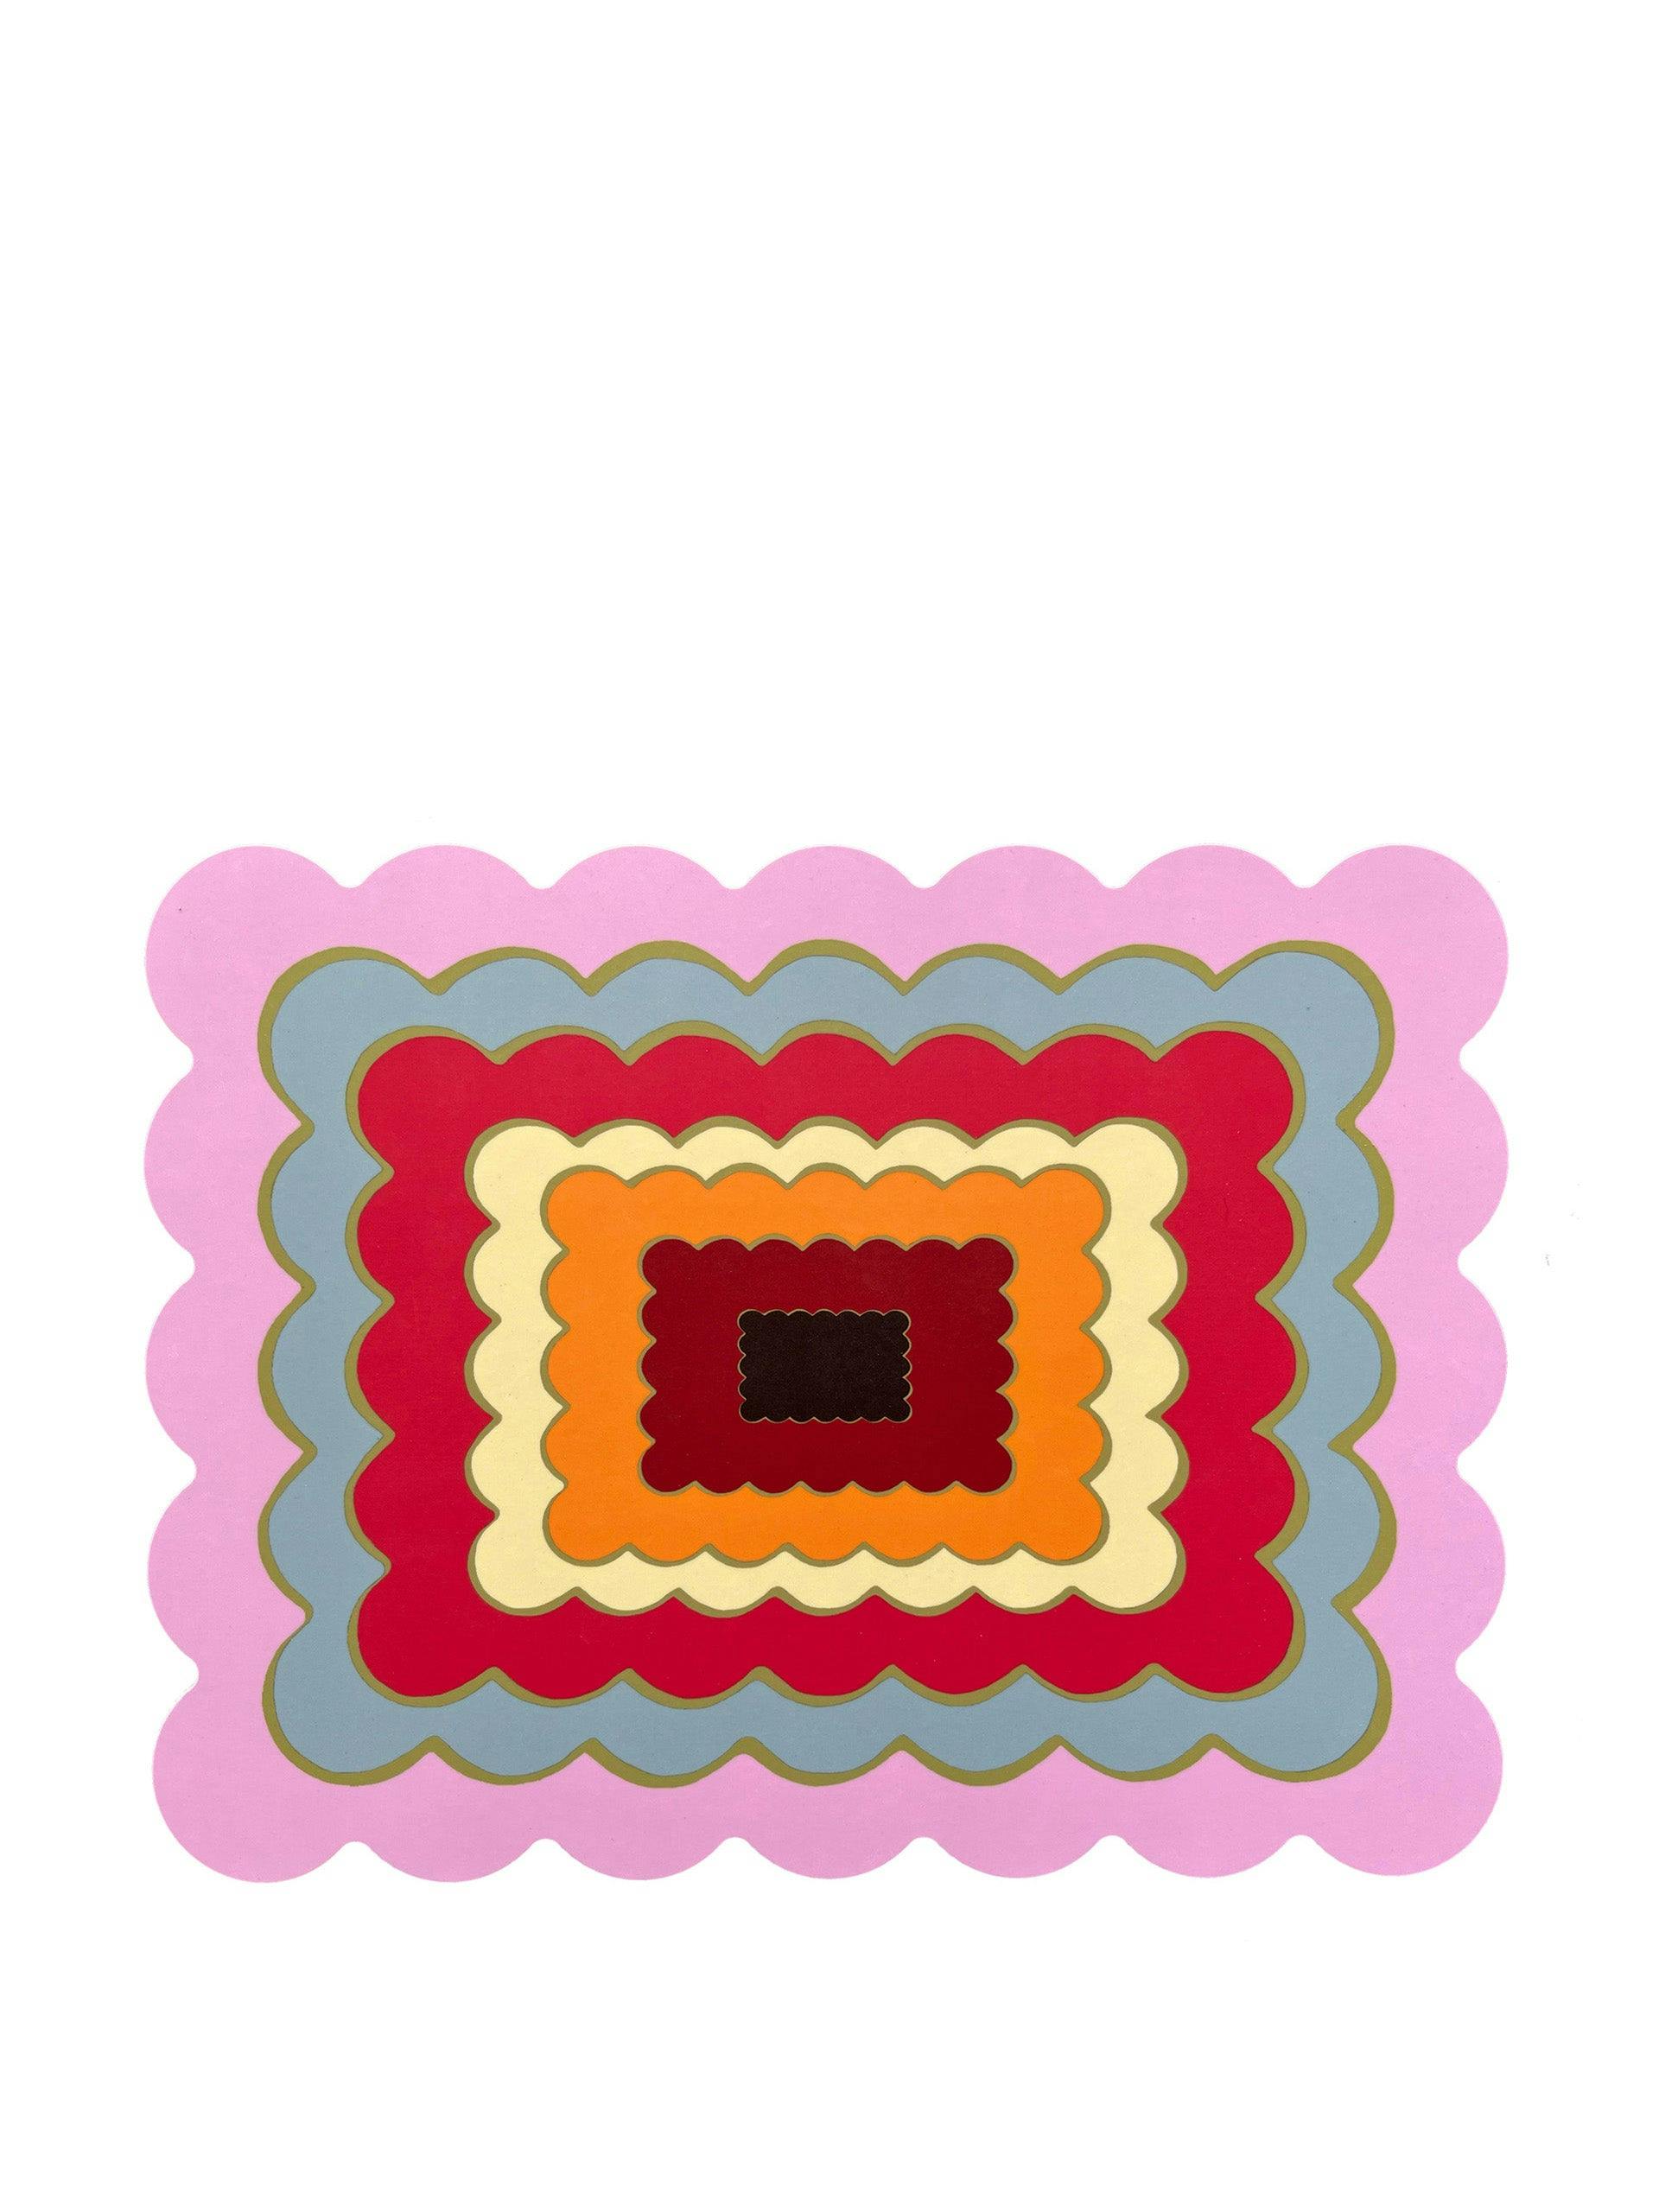 Pink rainbow scallop edge placemat